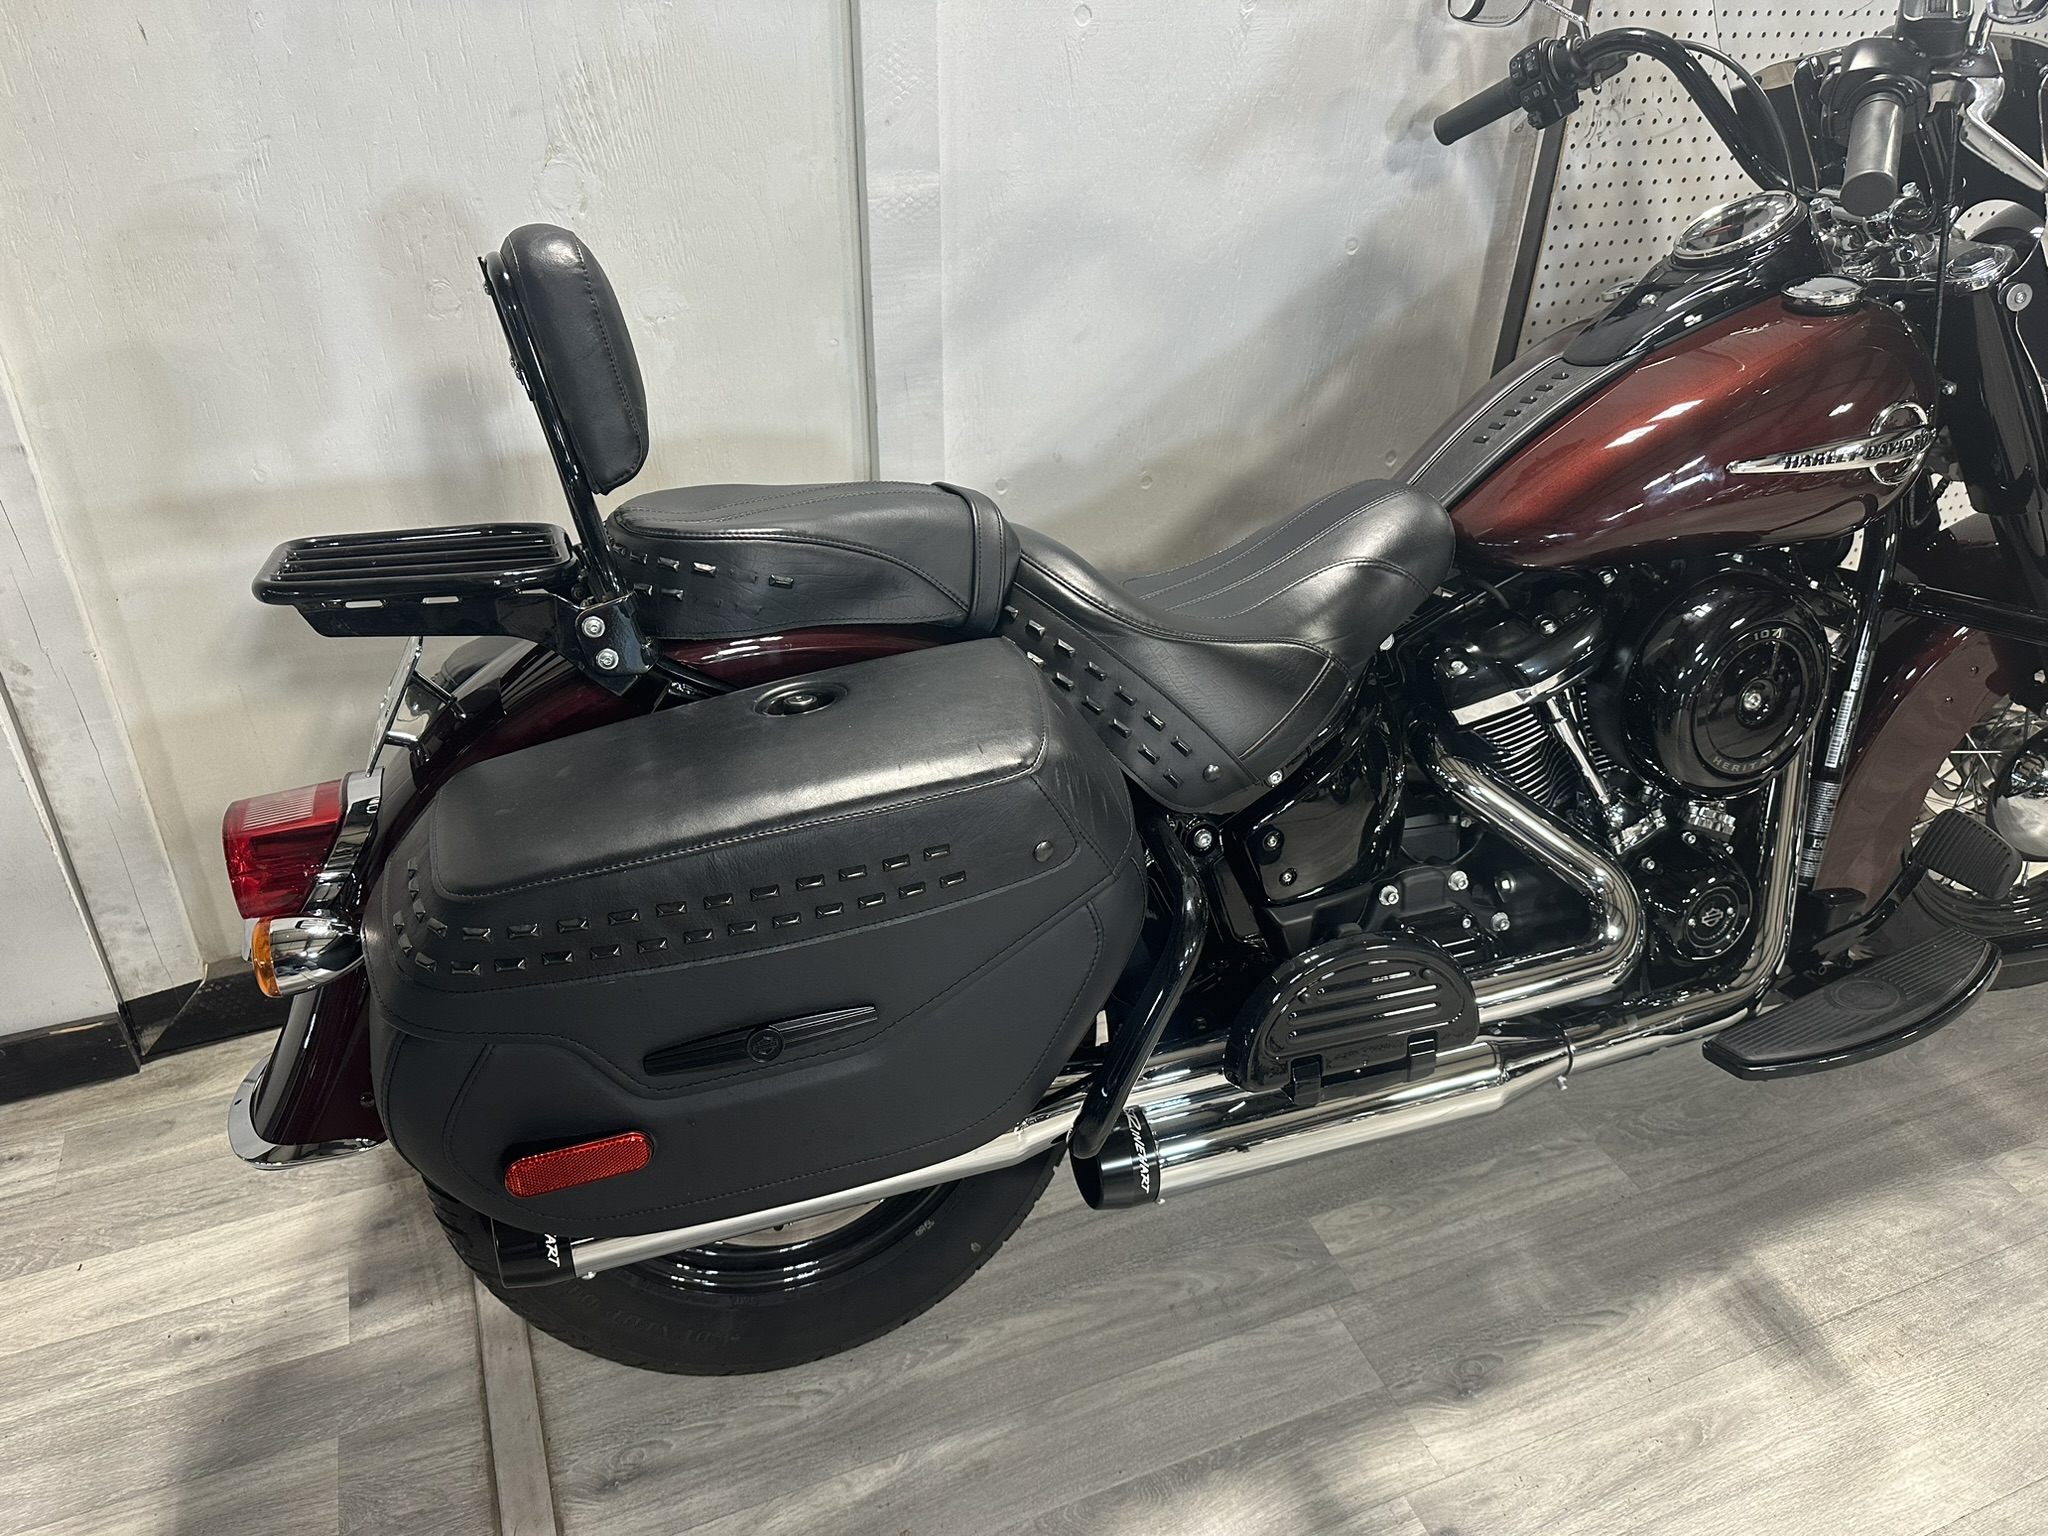 HARLEY DAVIDSON HERITAGE CLASSIC FOR SALE ONTARIO